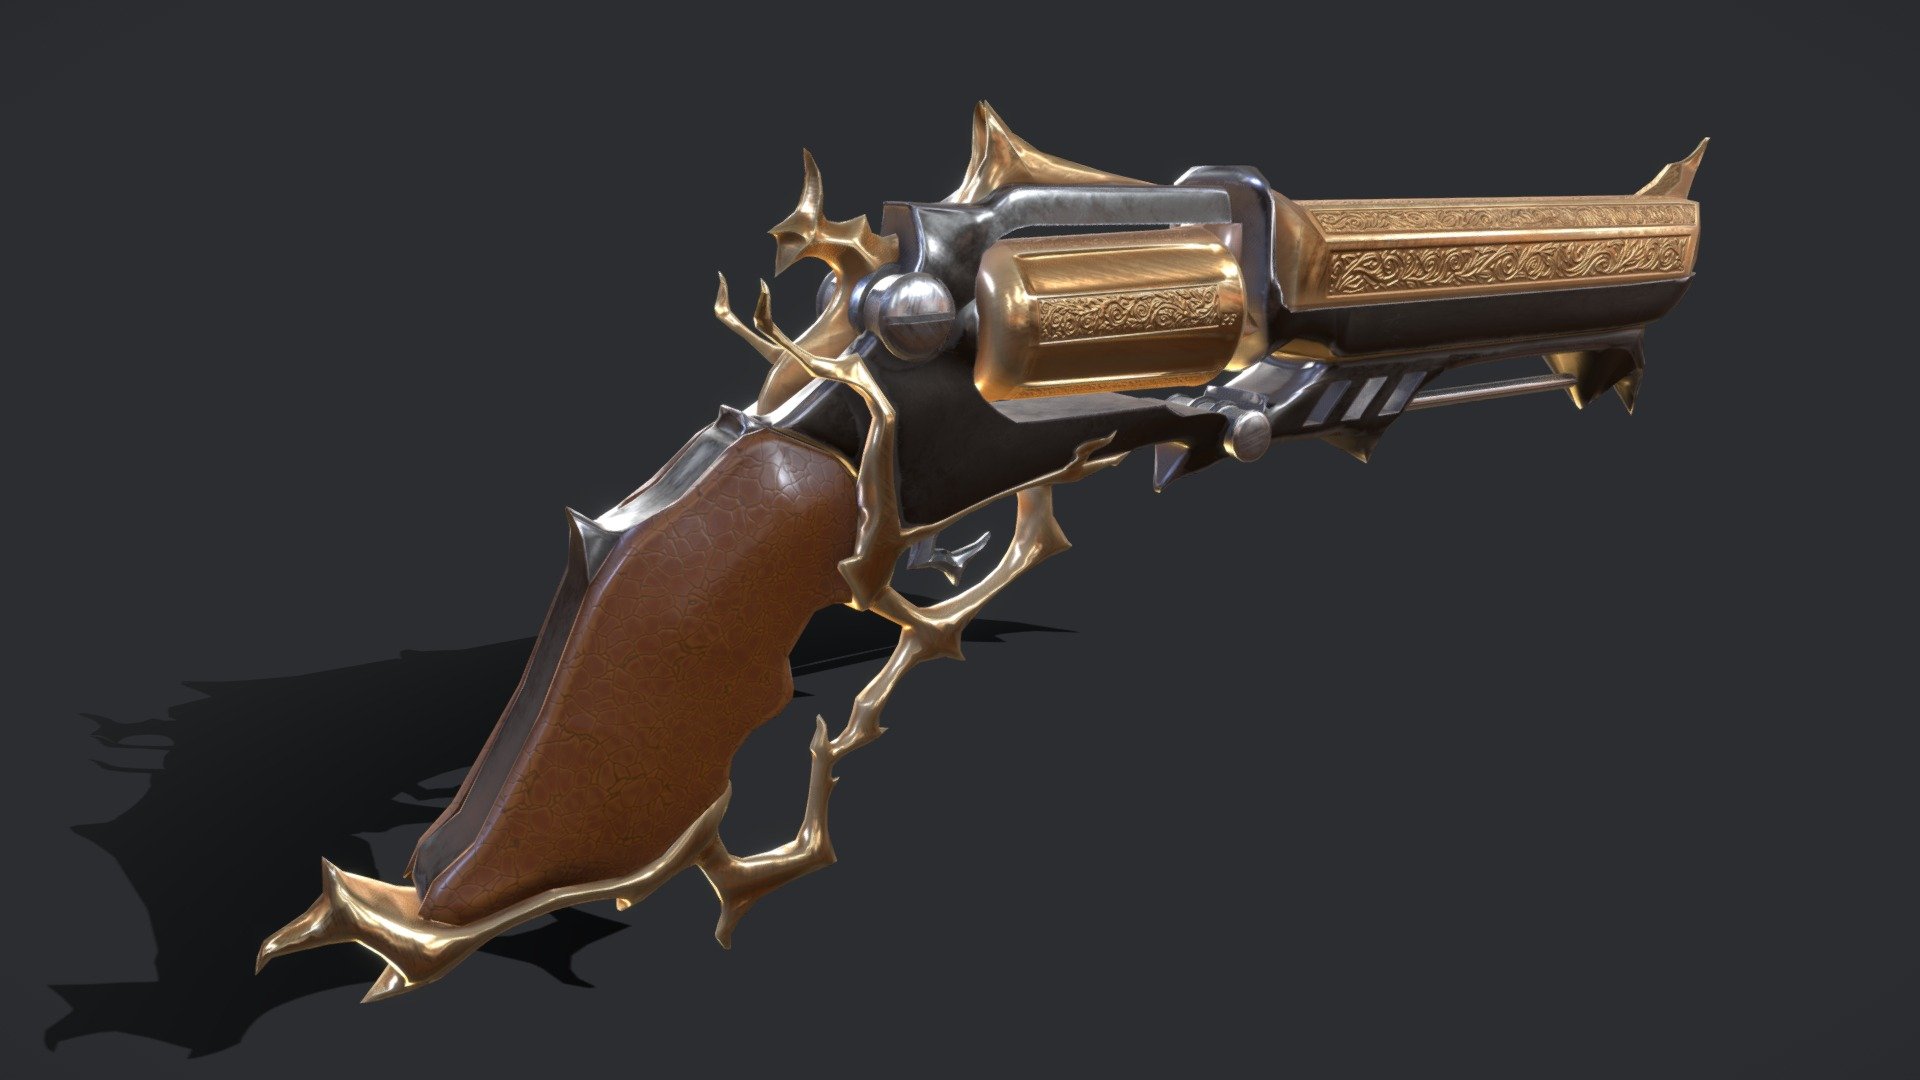 Fantasy Revolver created from scratch, concept art included.
Modelled with subdivision in Blender, Baked and painted in Substance Painter 3d model